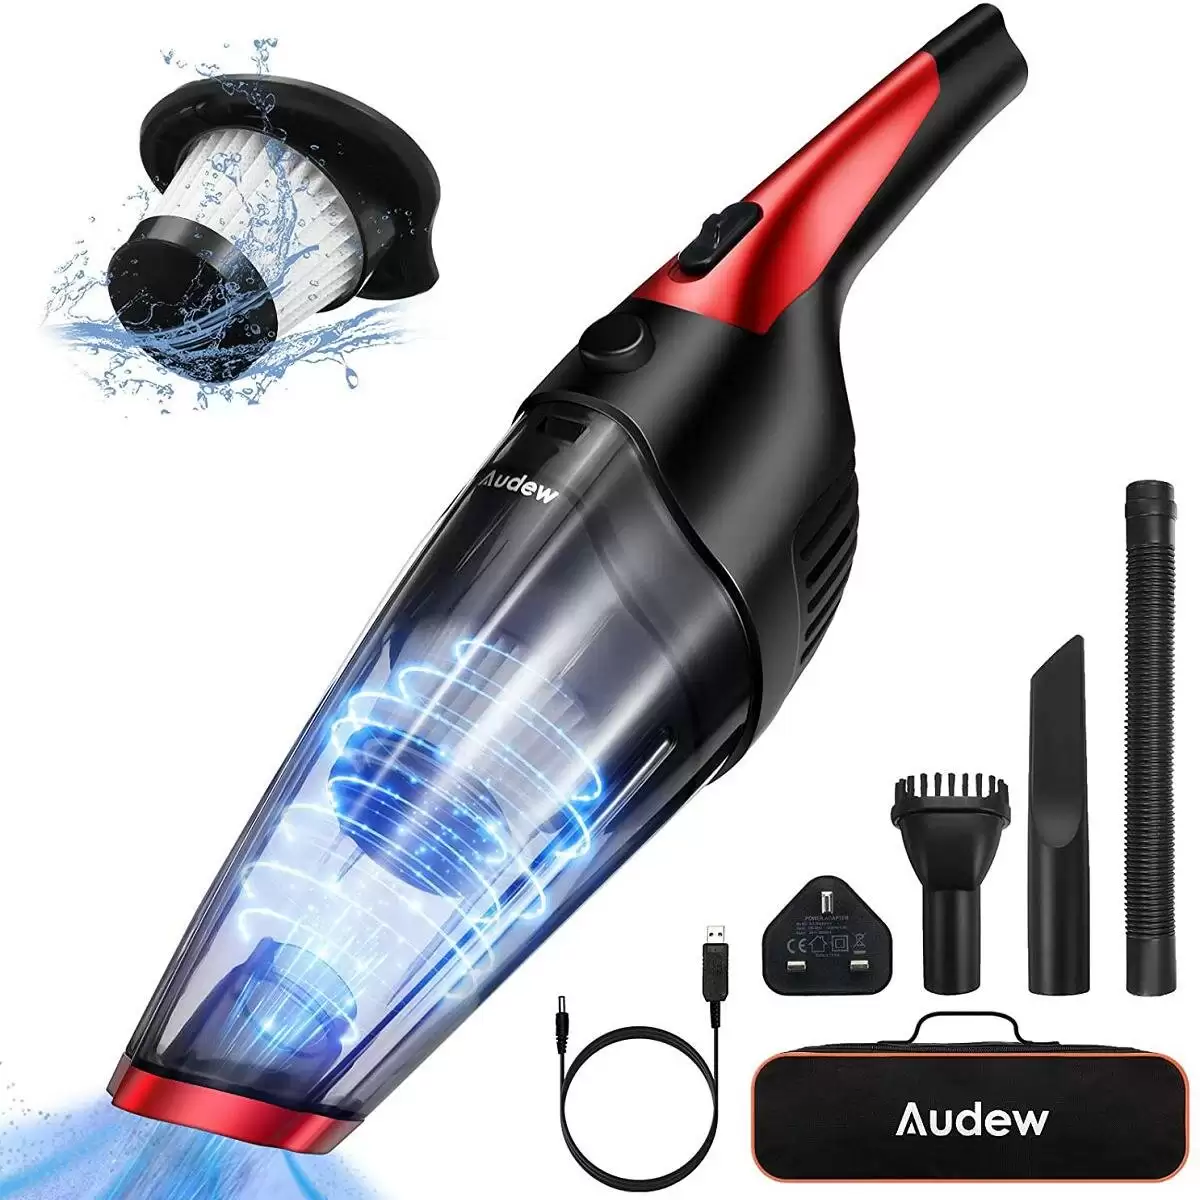 Order In Just $24.30 For Audew 7000pa Wireless Handheld Car Cleaning Vacuum Cleaner With This Coupon At Banggood